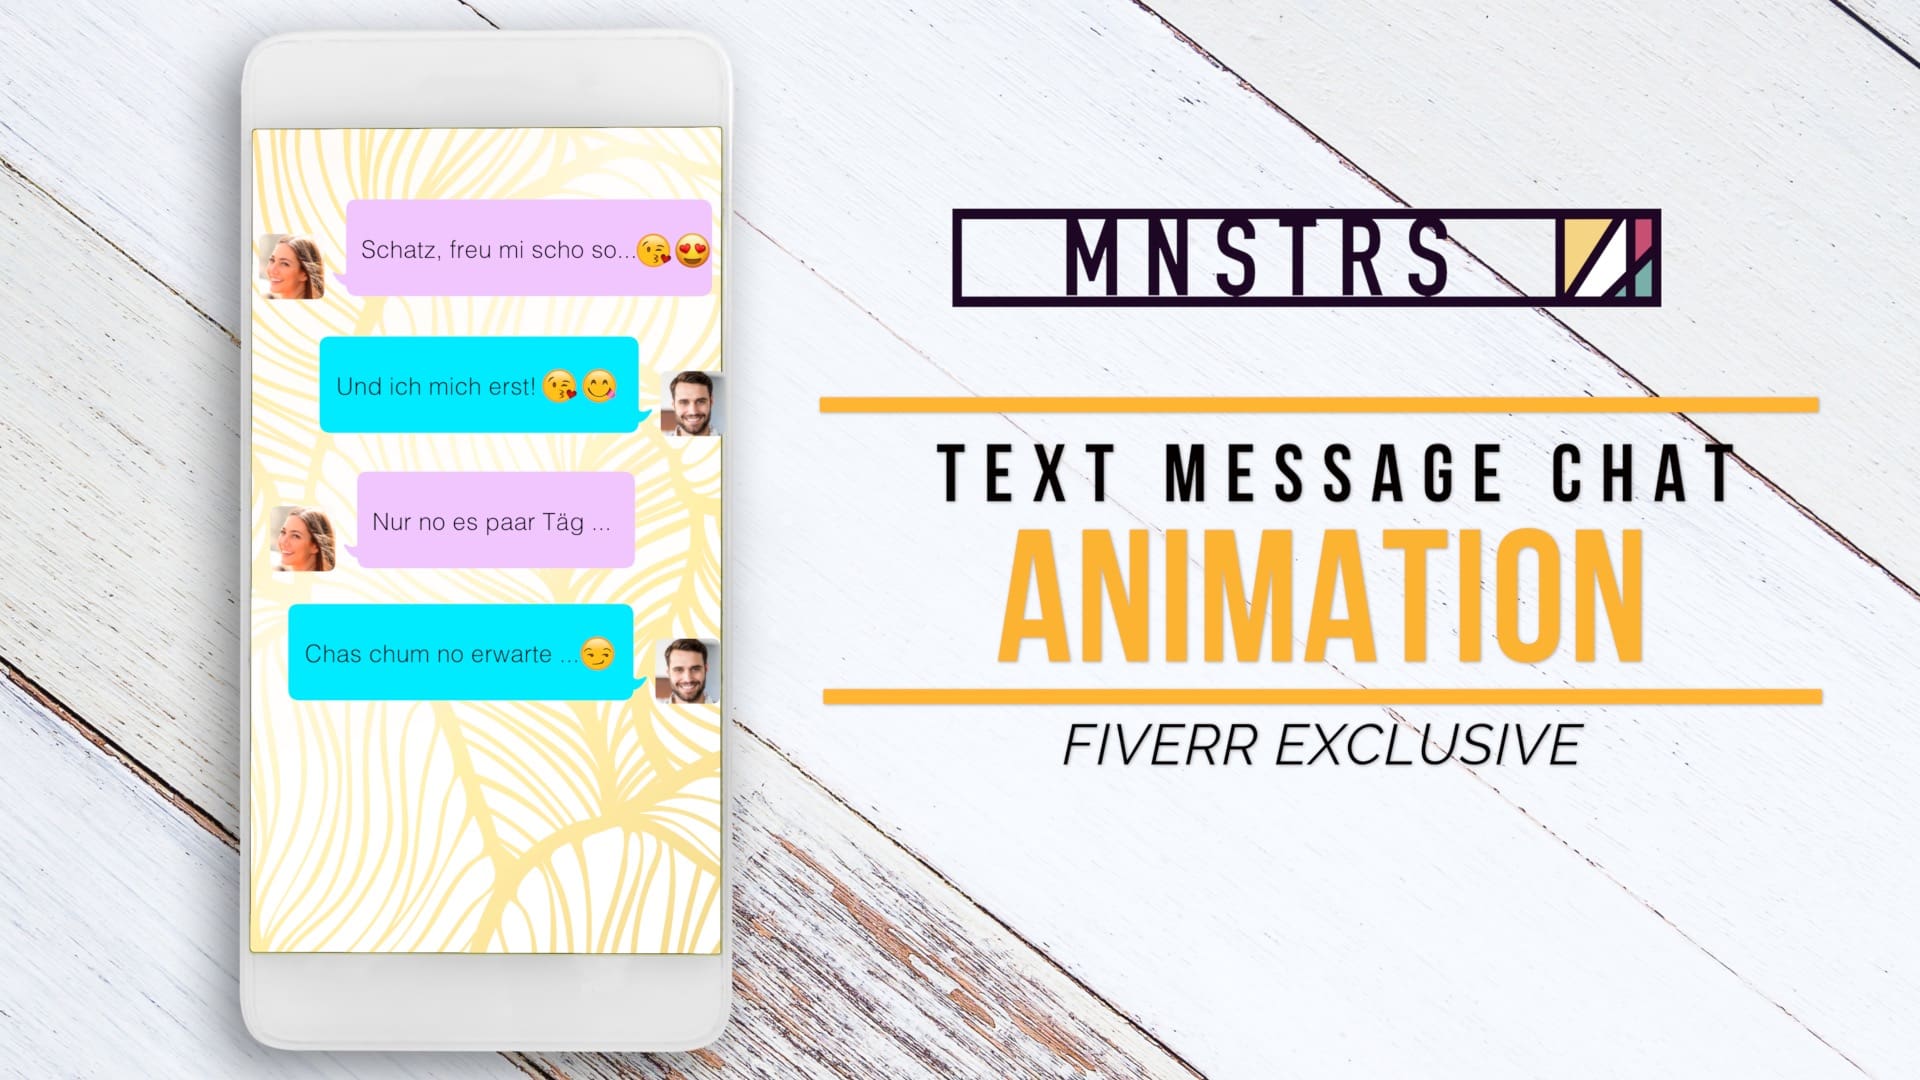 Make a text messages chat animation by Mnstrs | Fiverr